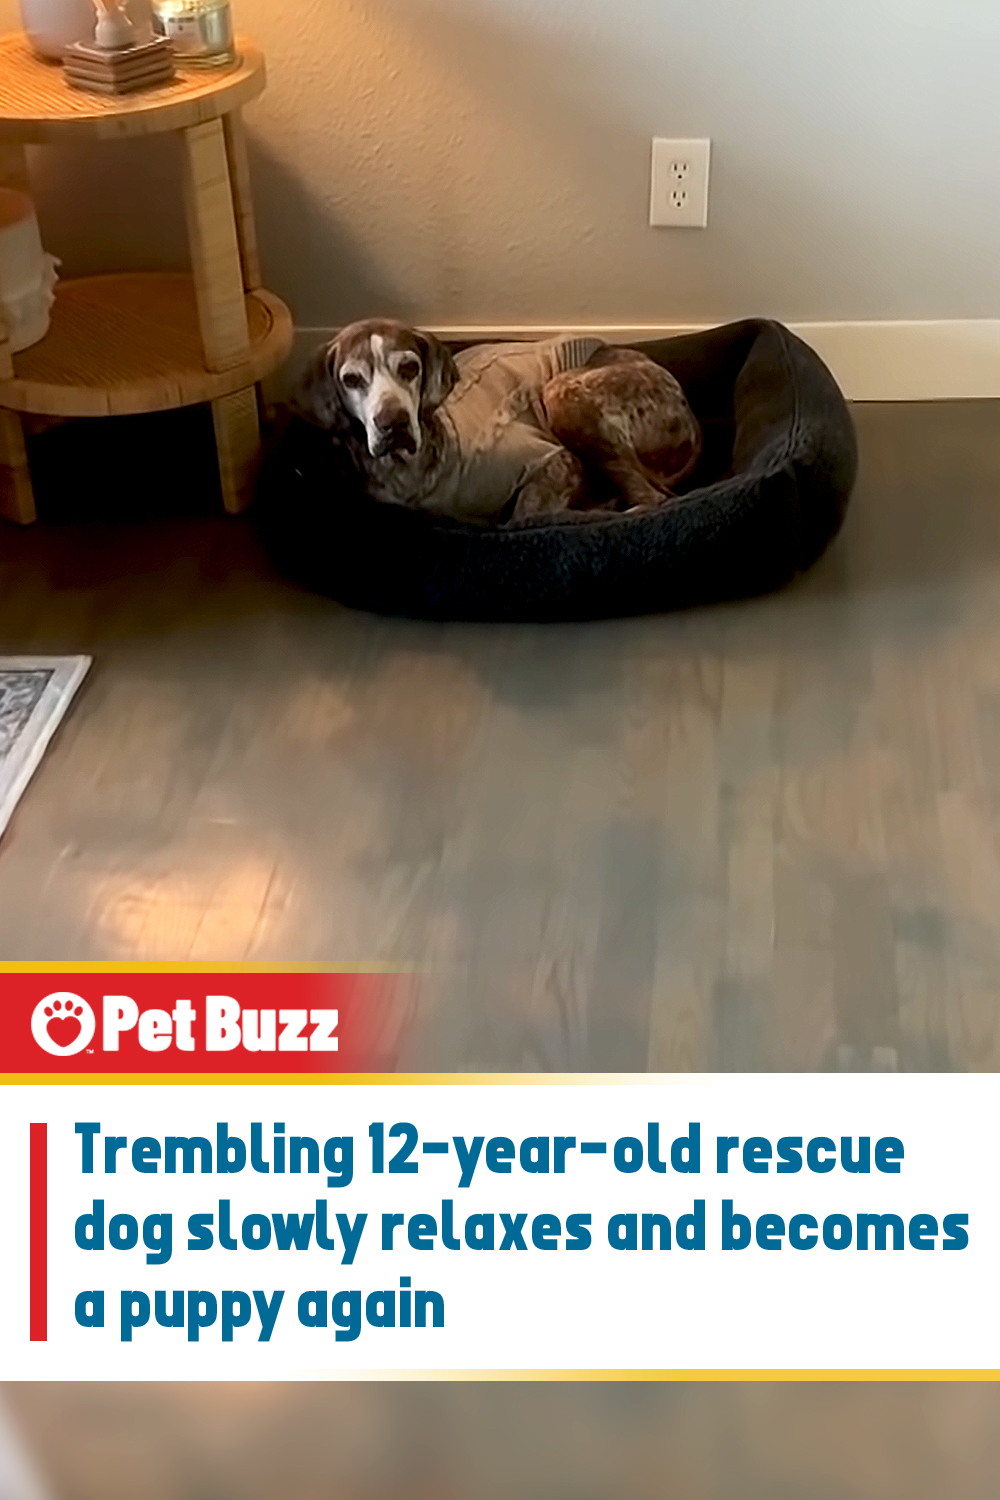 Trembling 12-year-old rescue dog slowly relaxes and becomes a puppy again